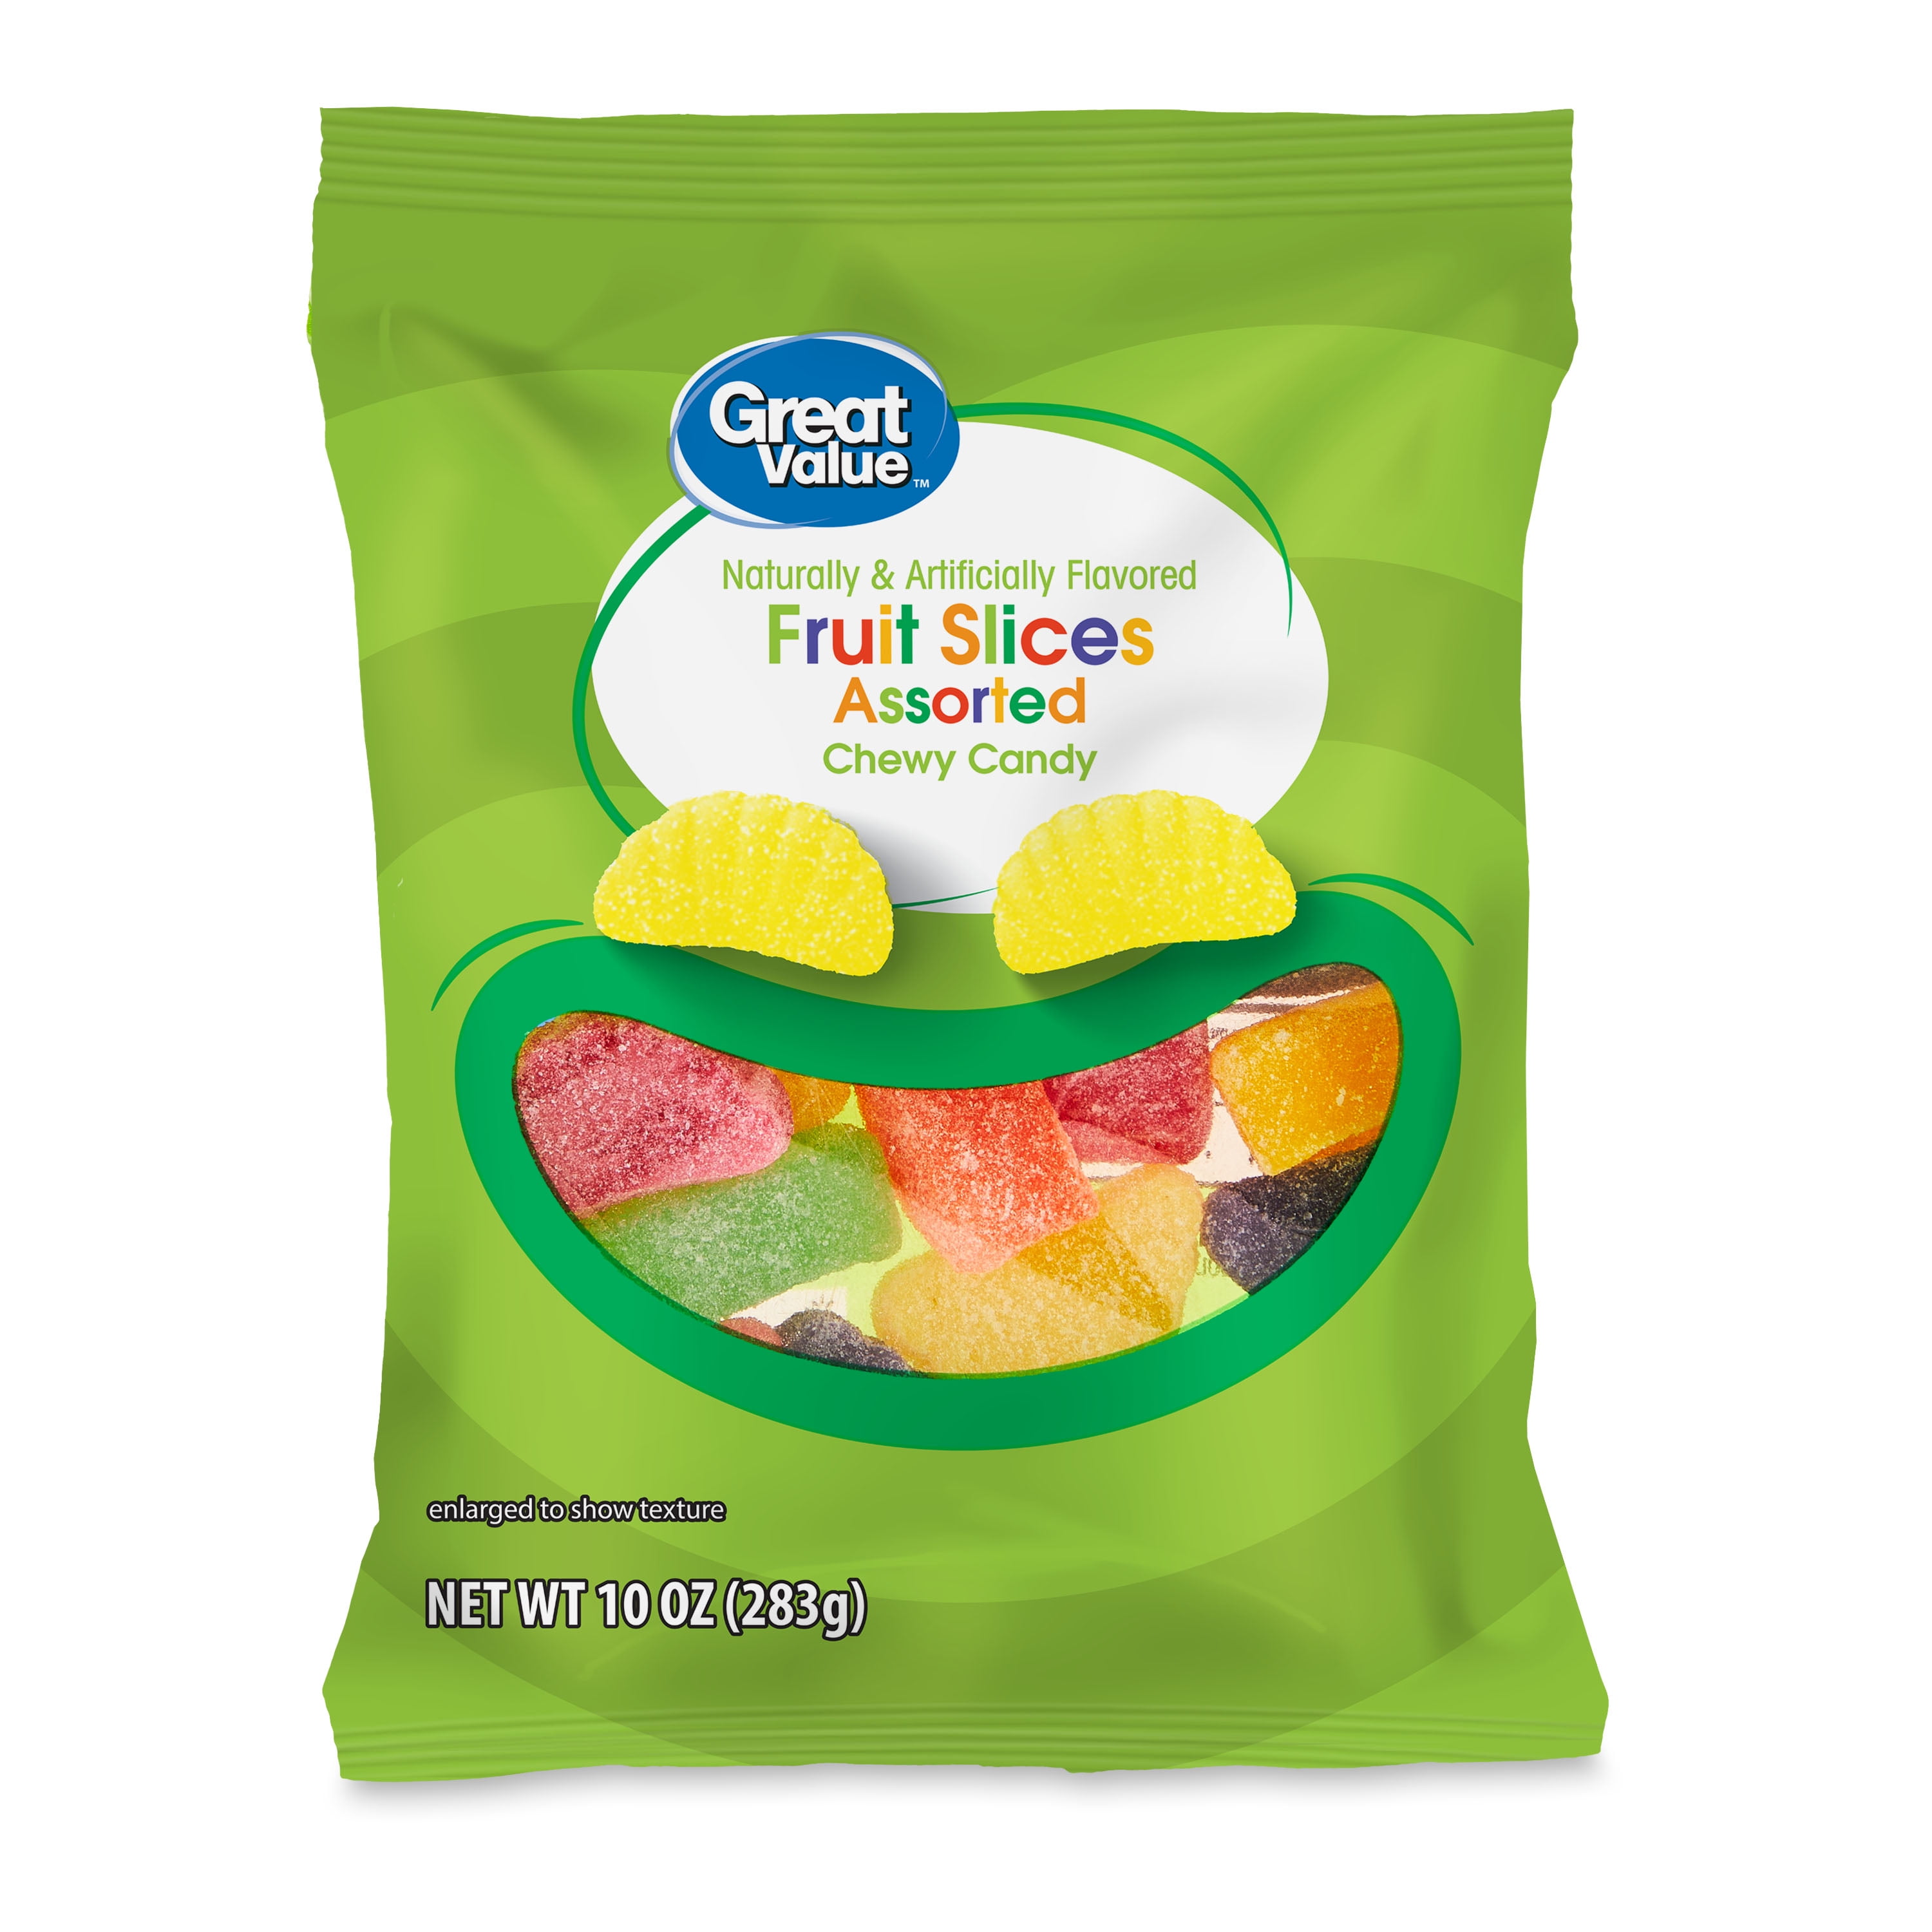 Great Value Fruit Slices Chewy Candy, 10 oz 